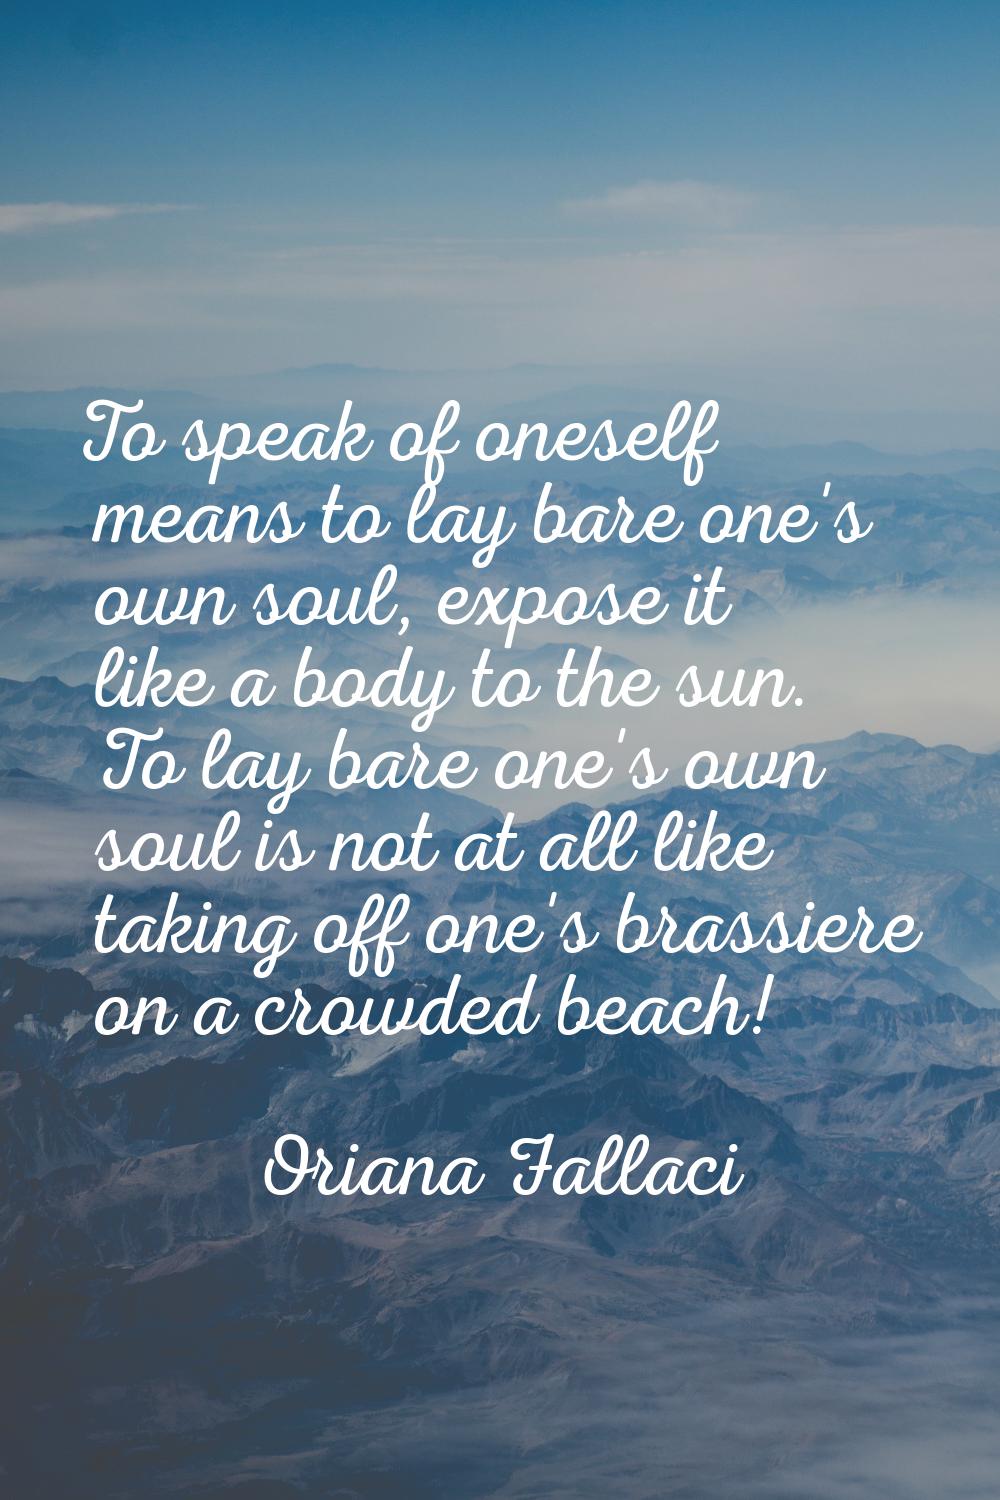 To speak of oneself means to lay bare one's own soul, expose it like a body to the sun. To lay bare